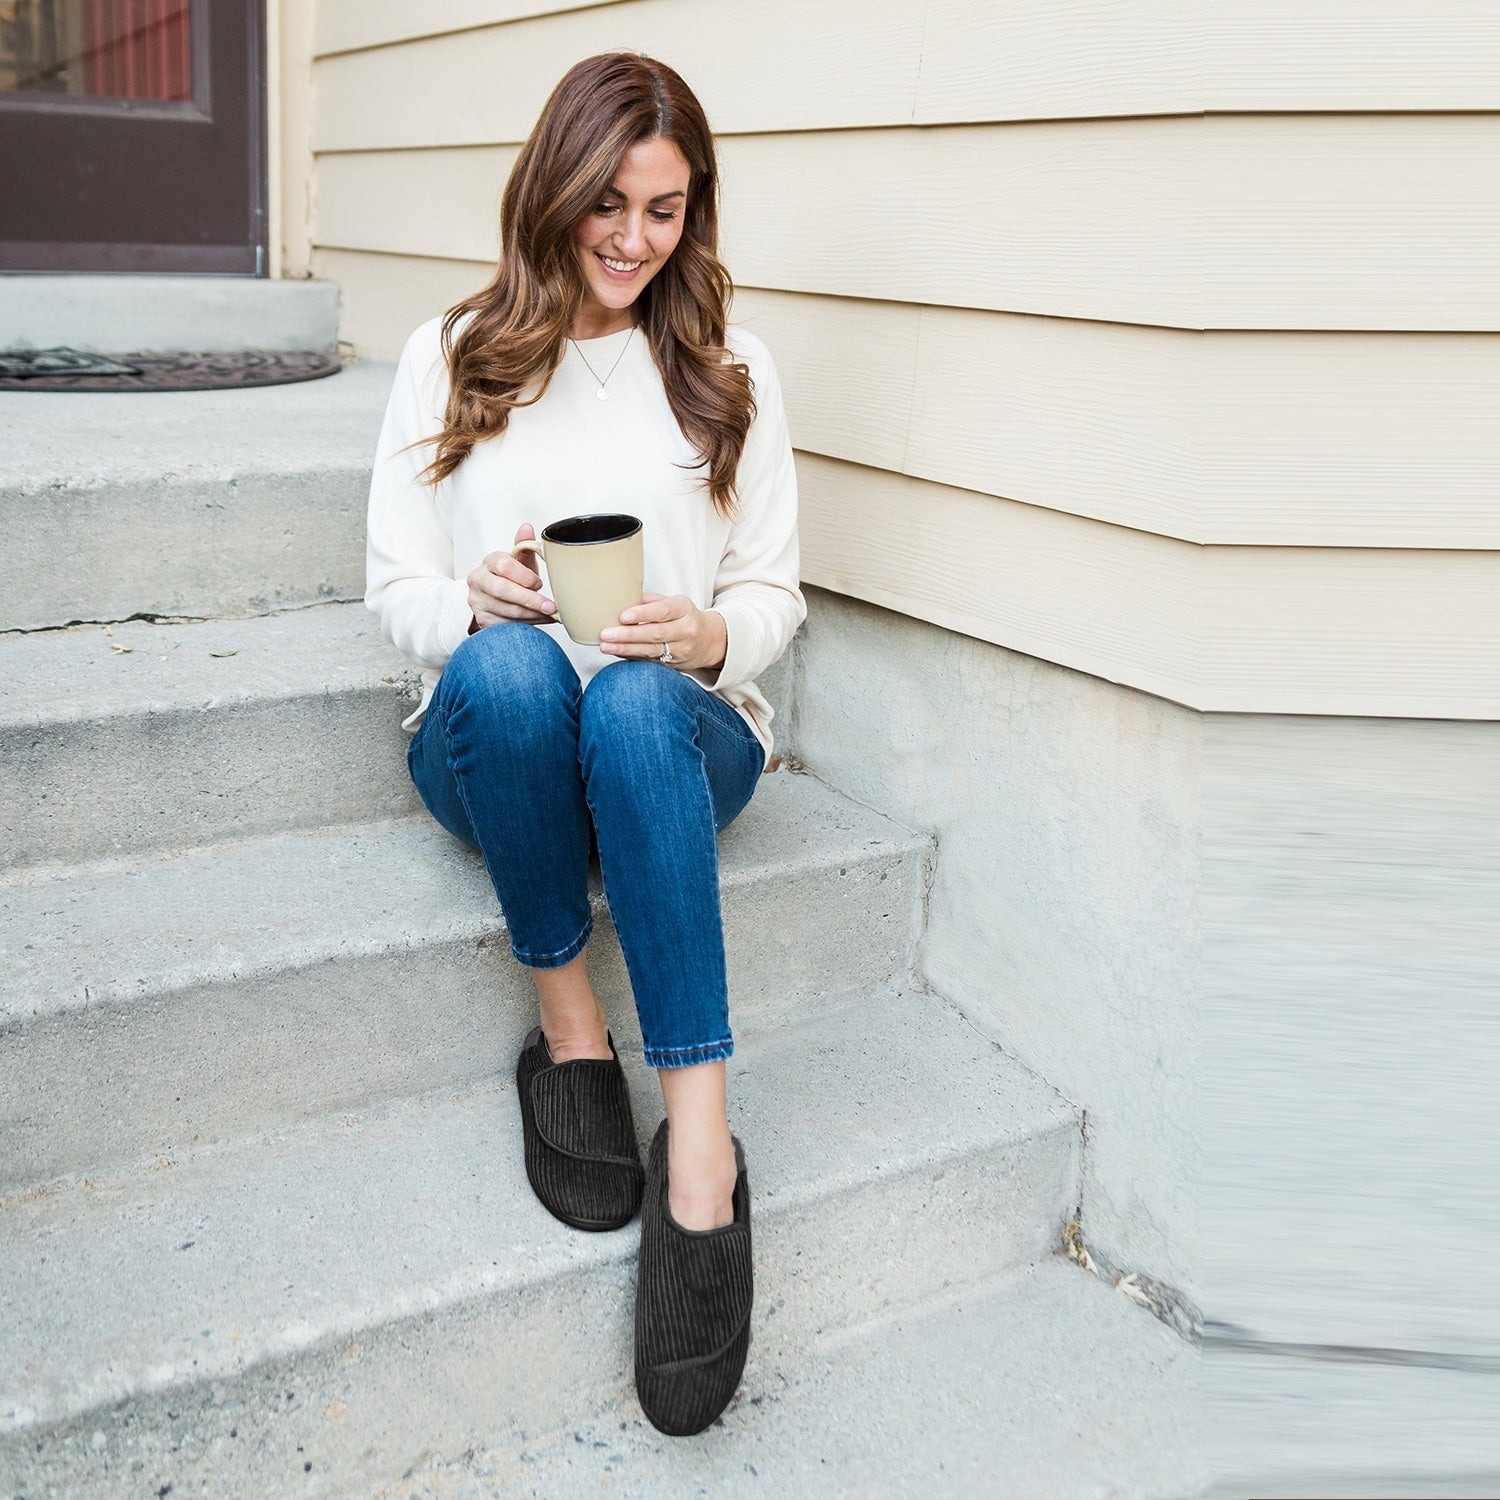 model sitting on steps holding a mug, wearing the black slippers, a white top and blue jeans